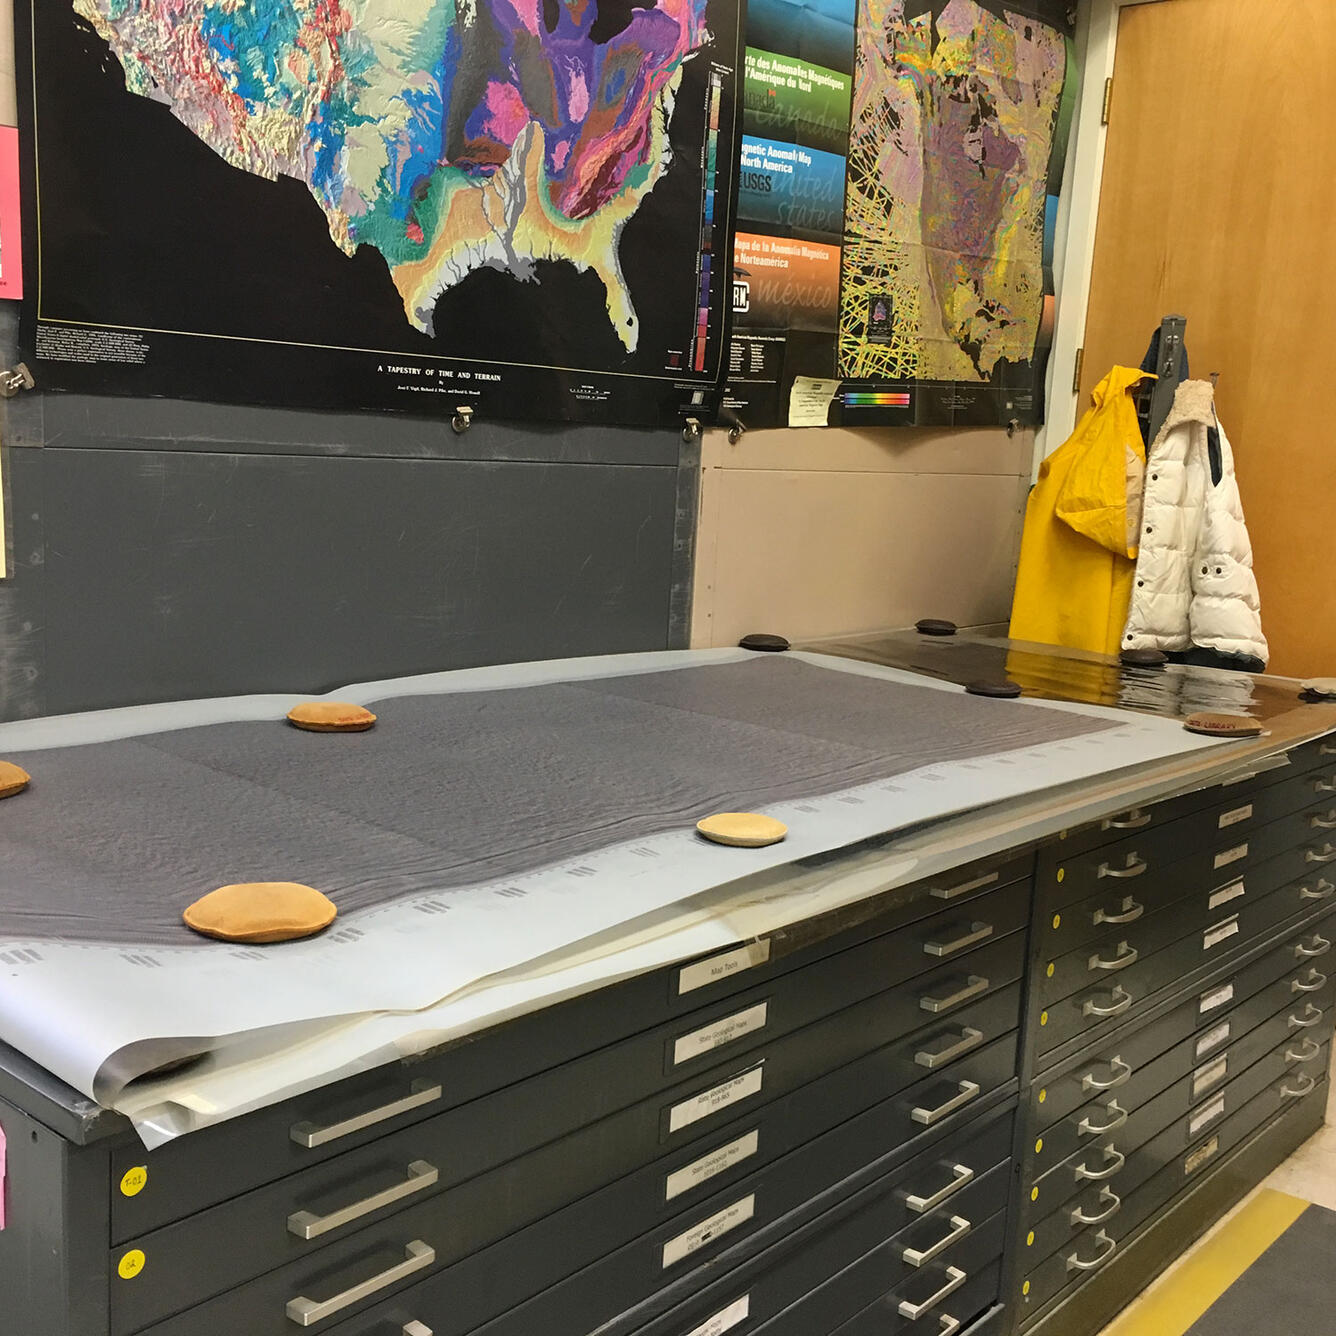 Image shows 35 year old seismic and sampling data being flattened out on a tabletop. 